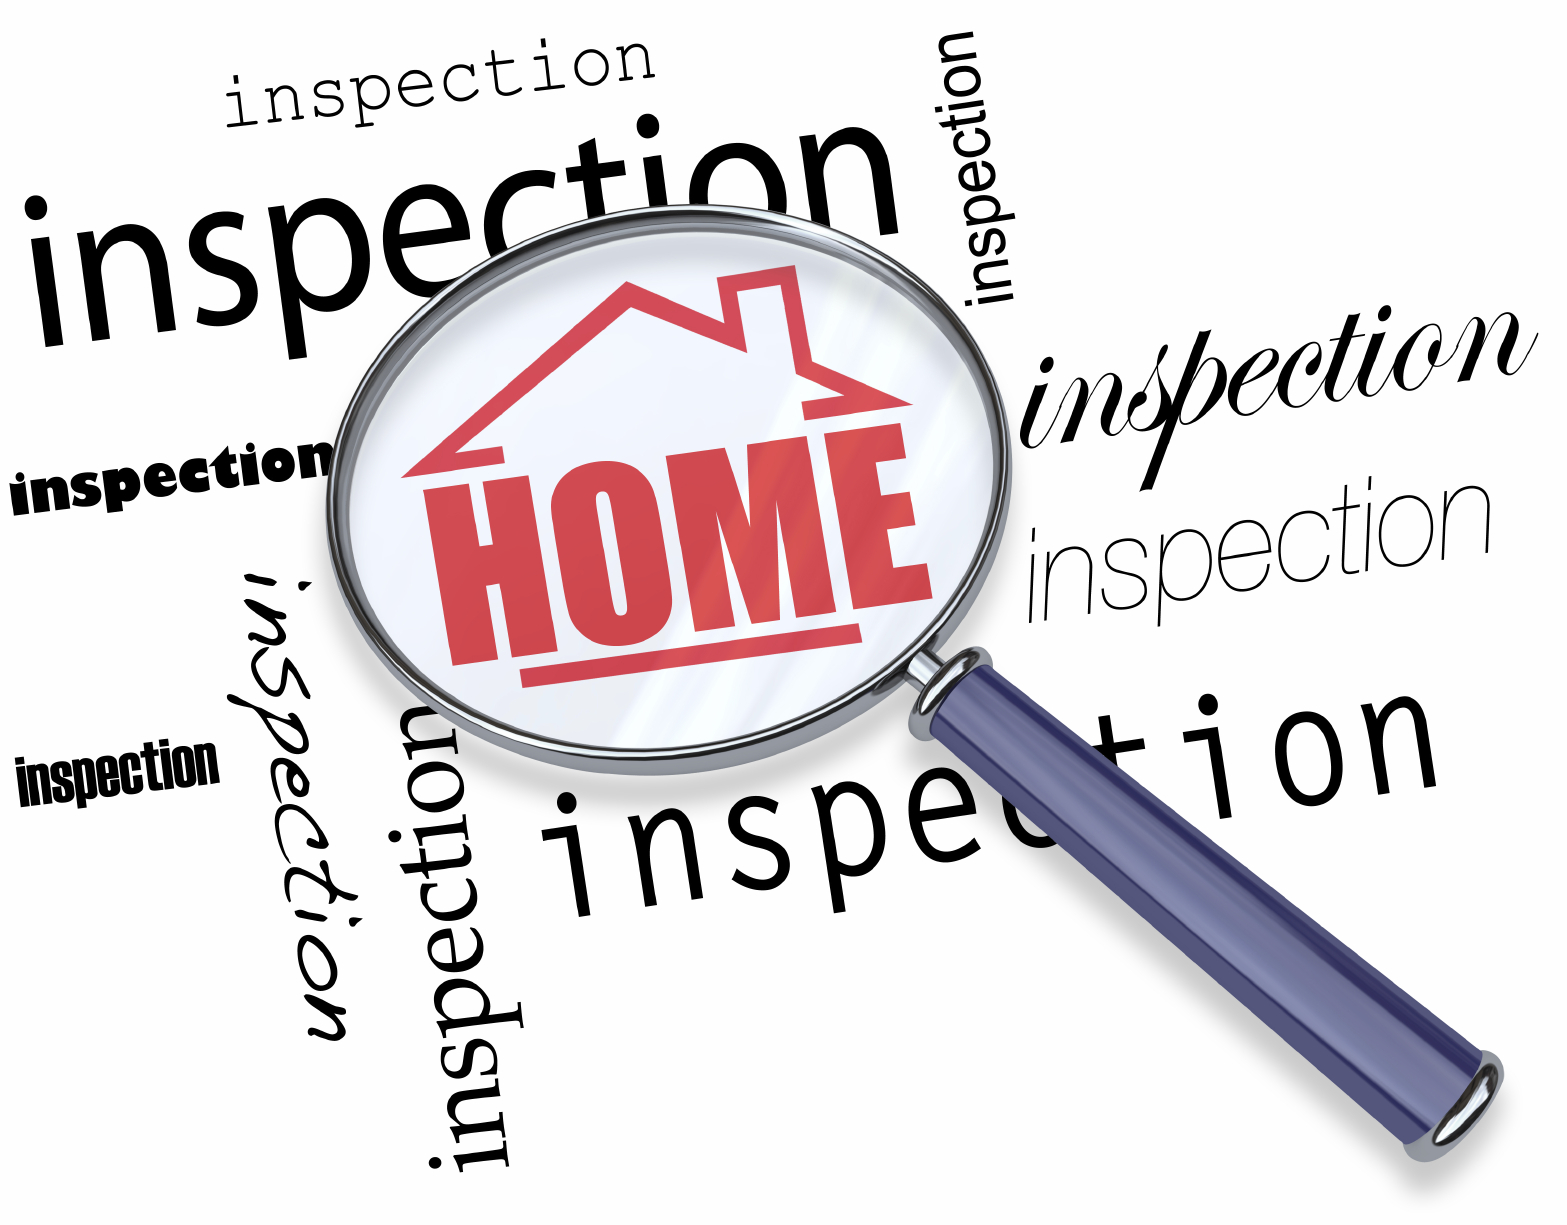 Buyer Home Inspections